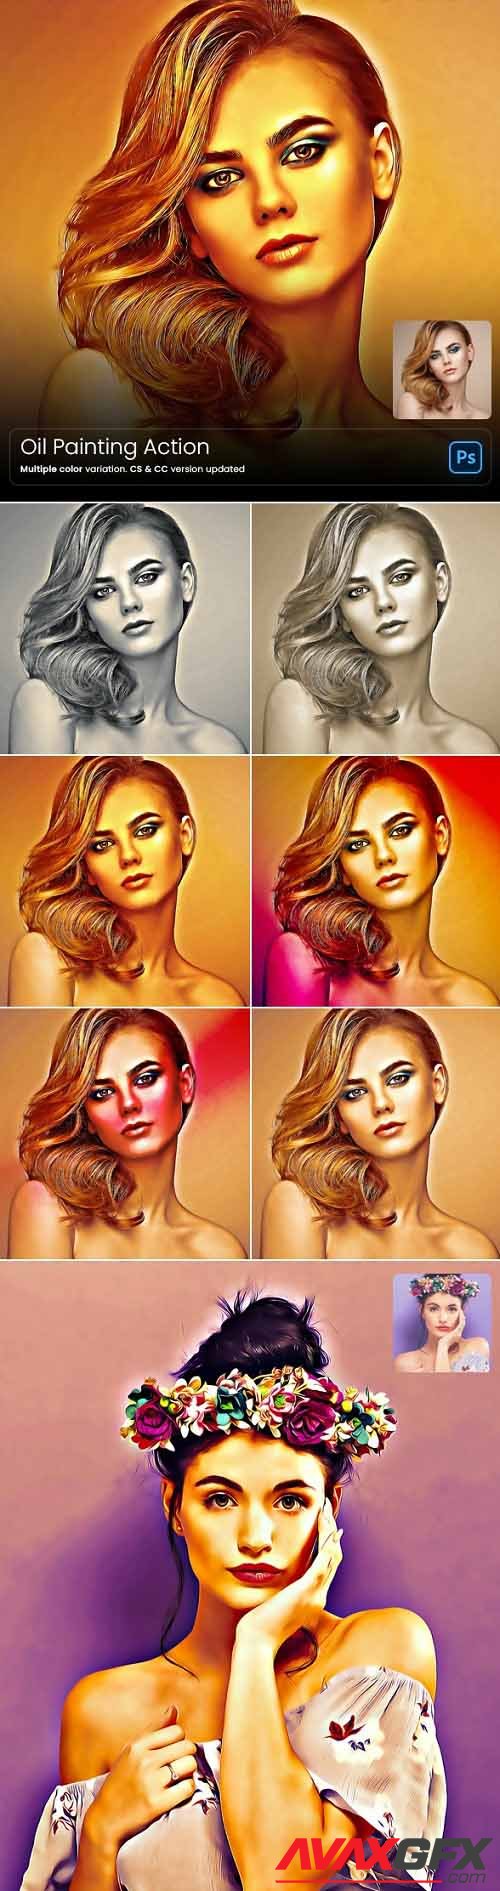 GraphicRiver - Oil Painting Action 29228095